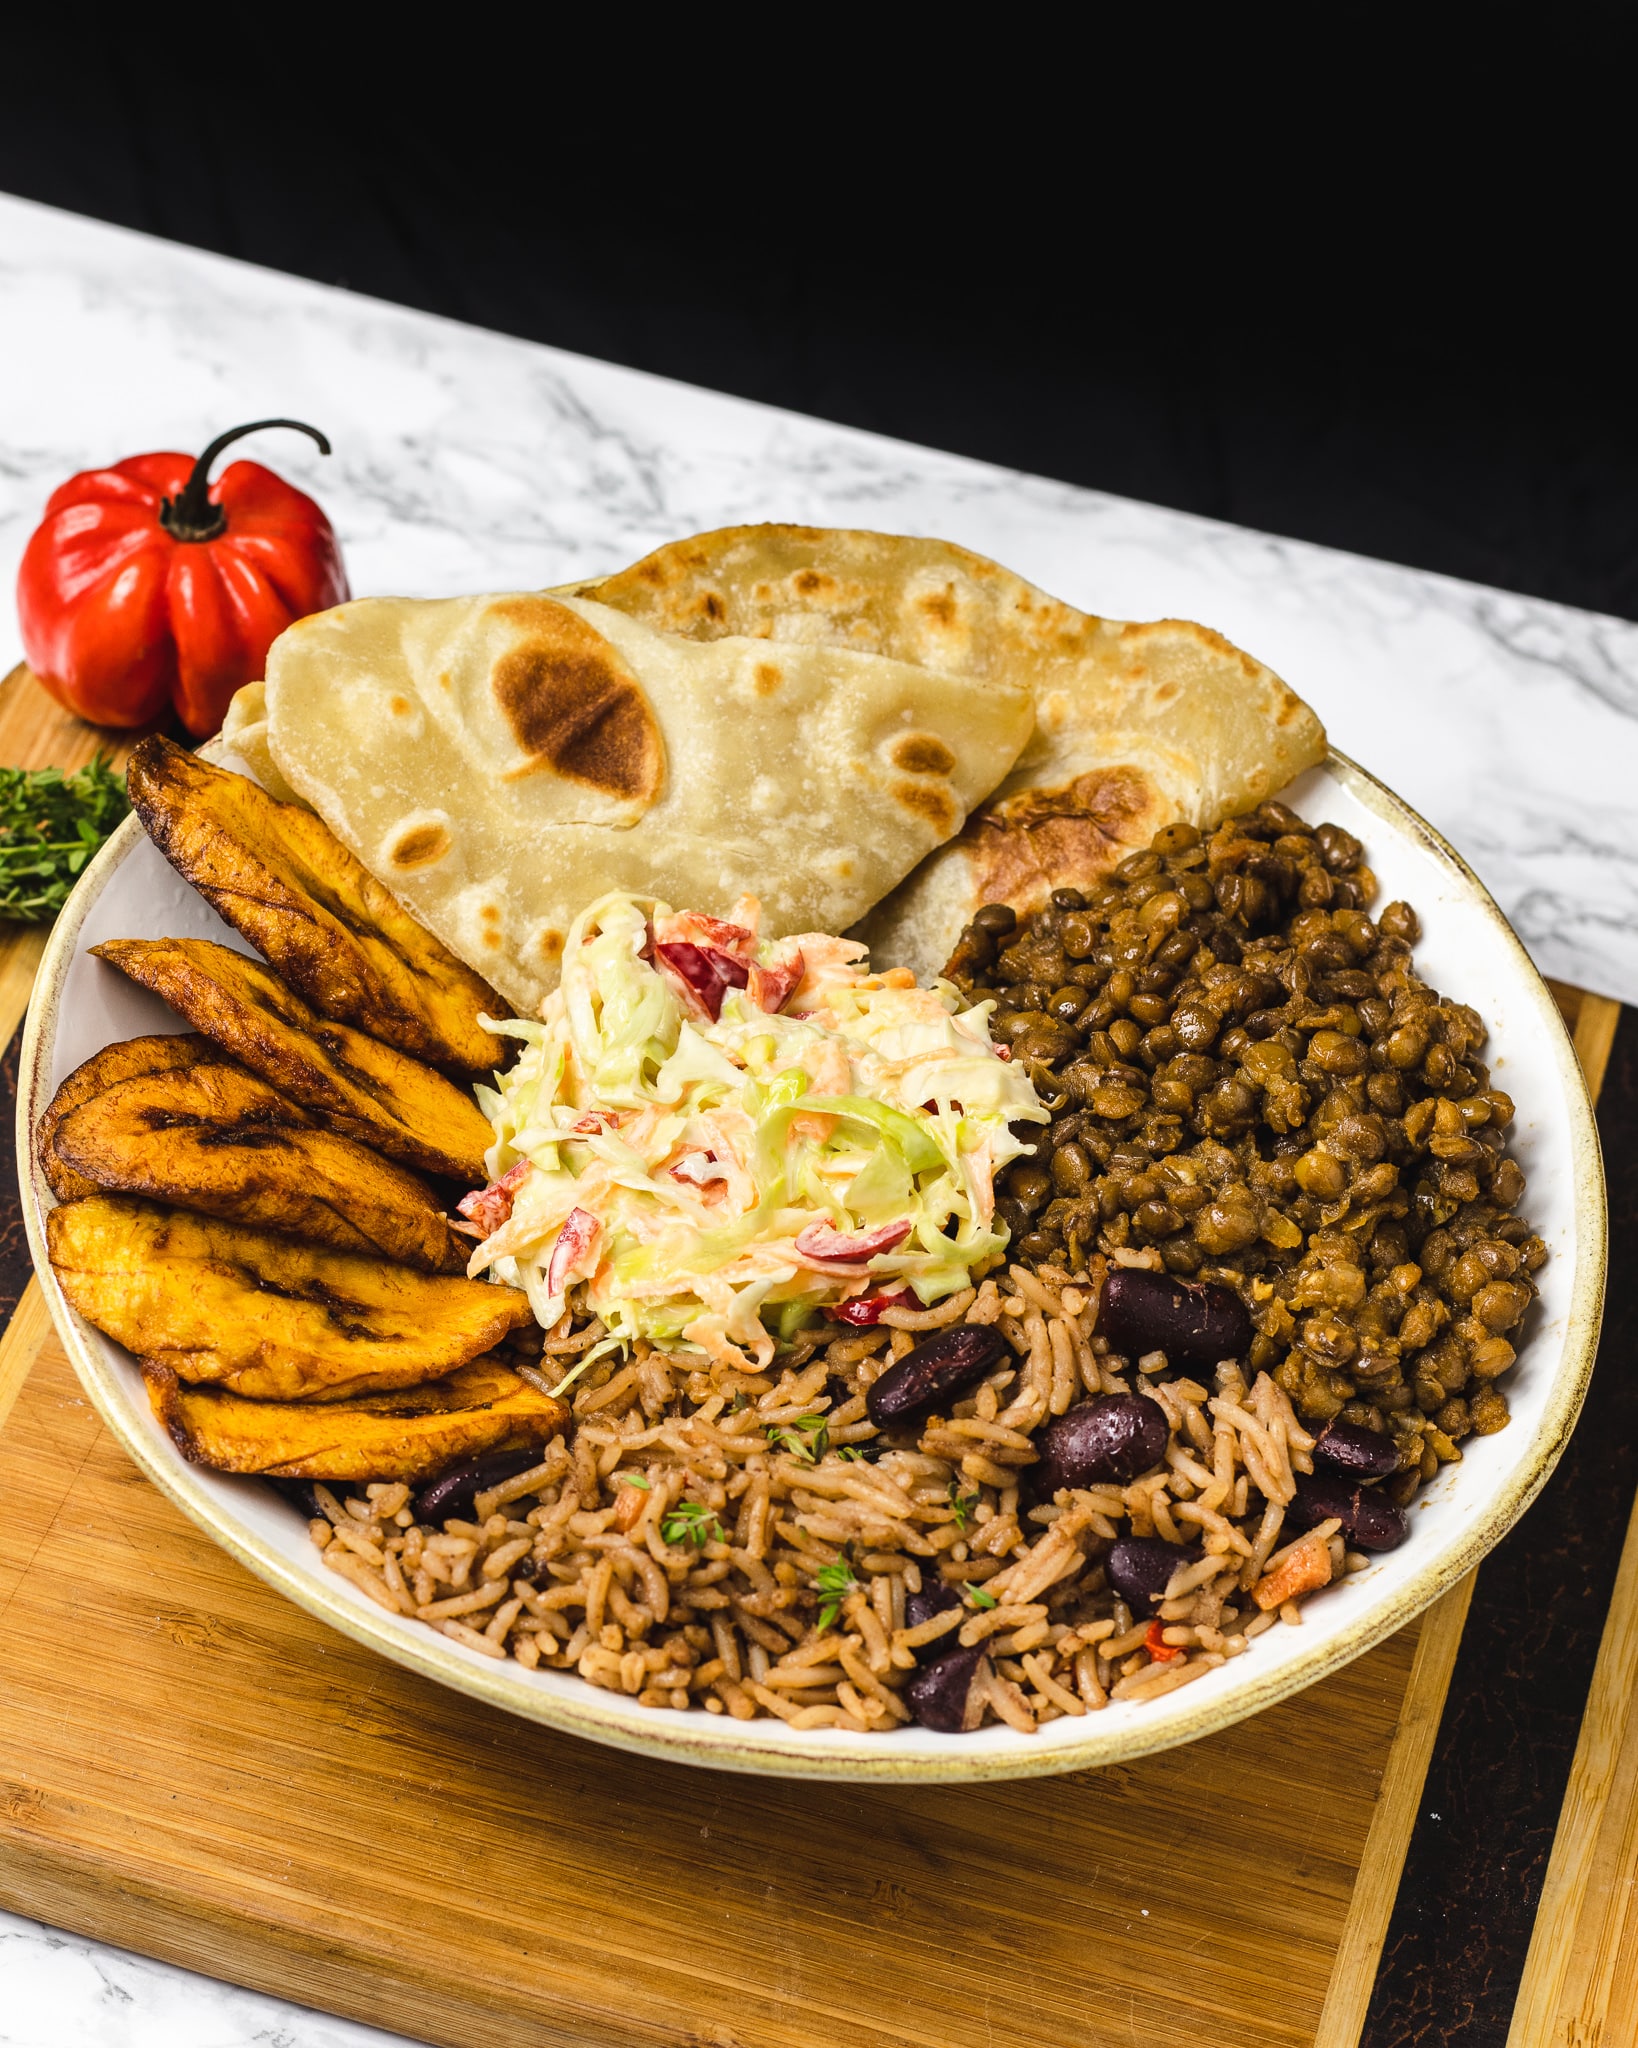 Lentils rice and peas coleslaw and roti - Jollof Rice-African and Caribbean Wedding Caterer